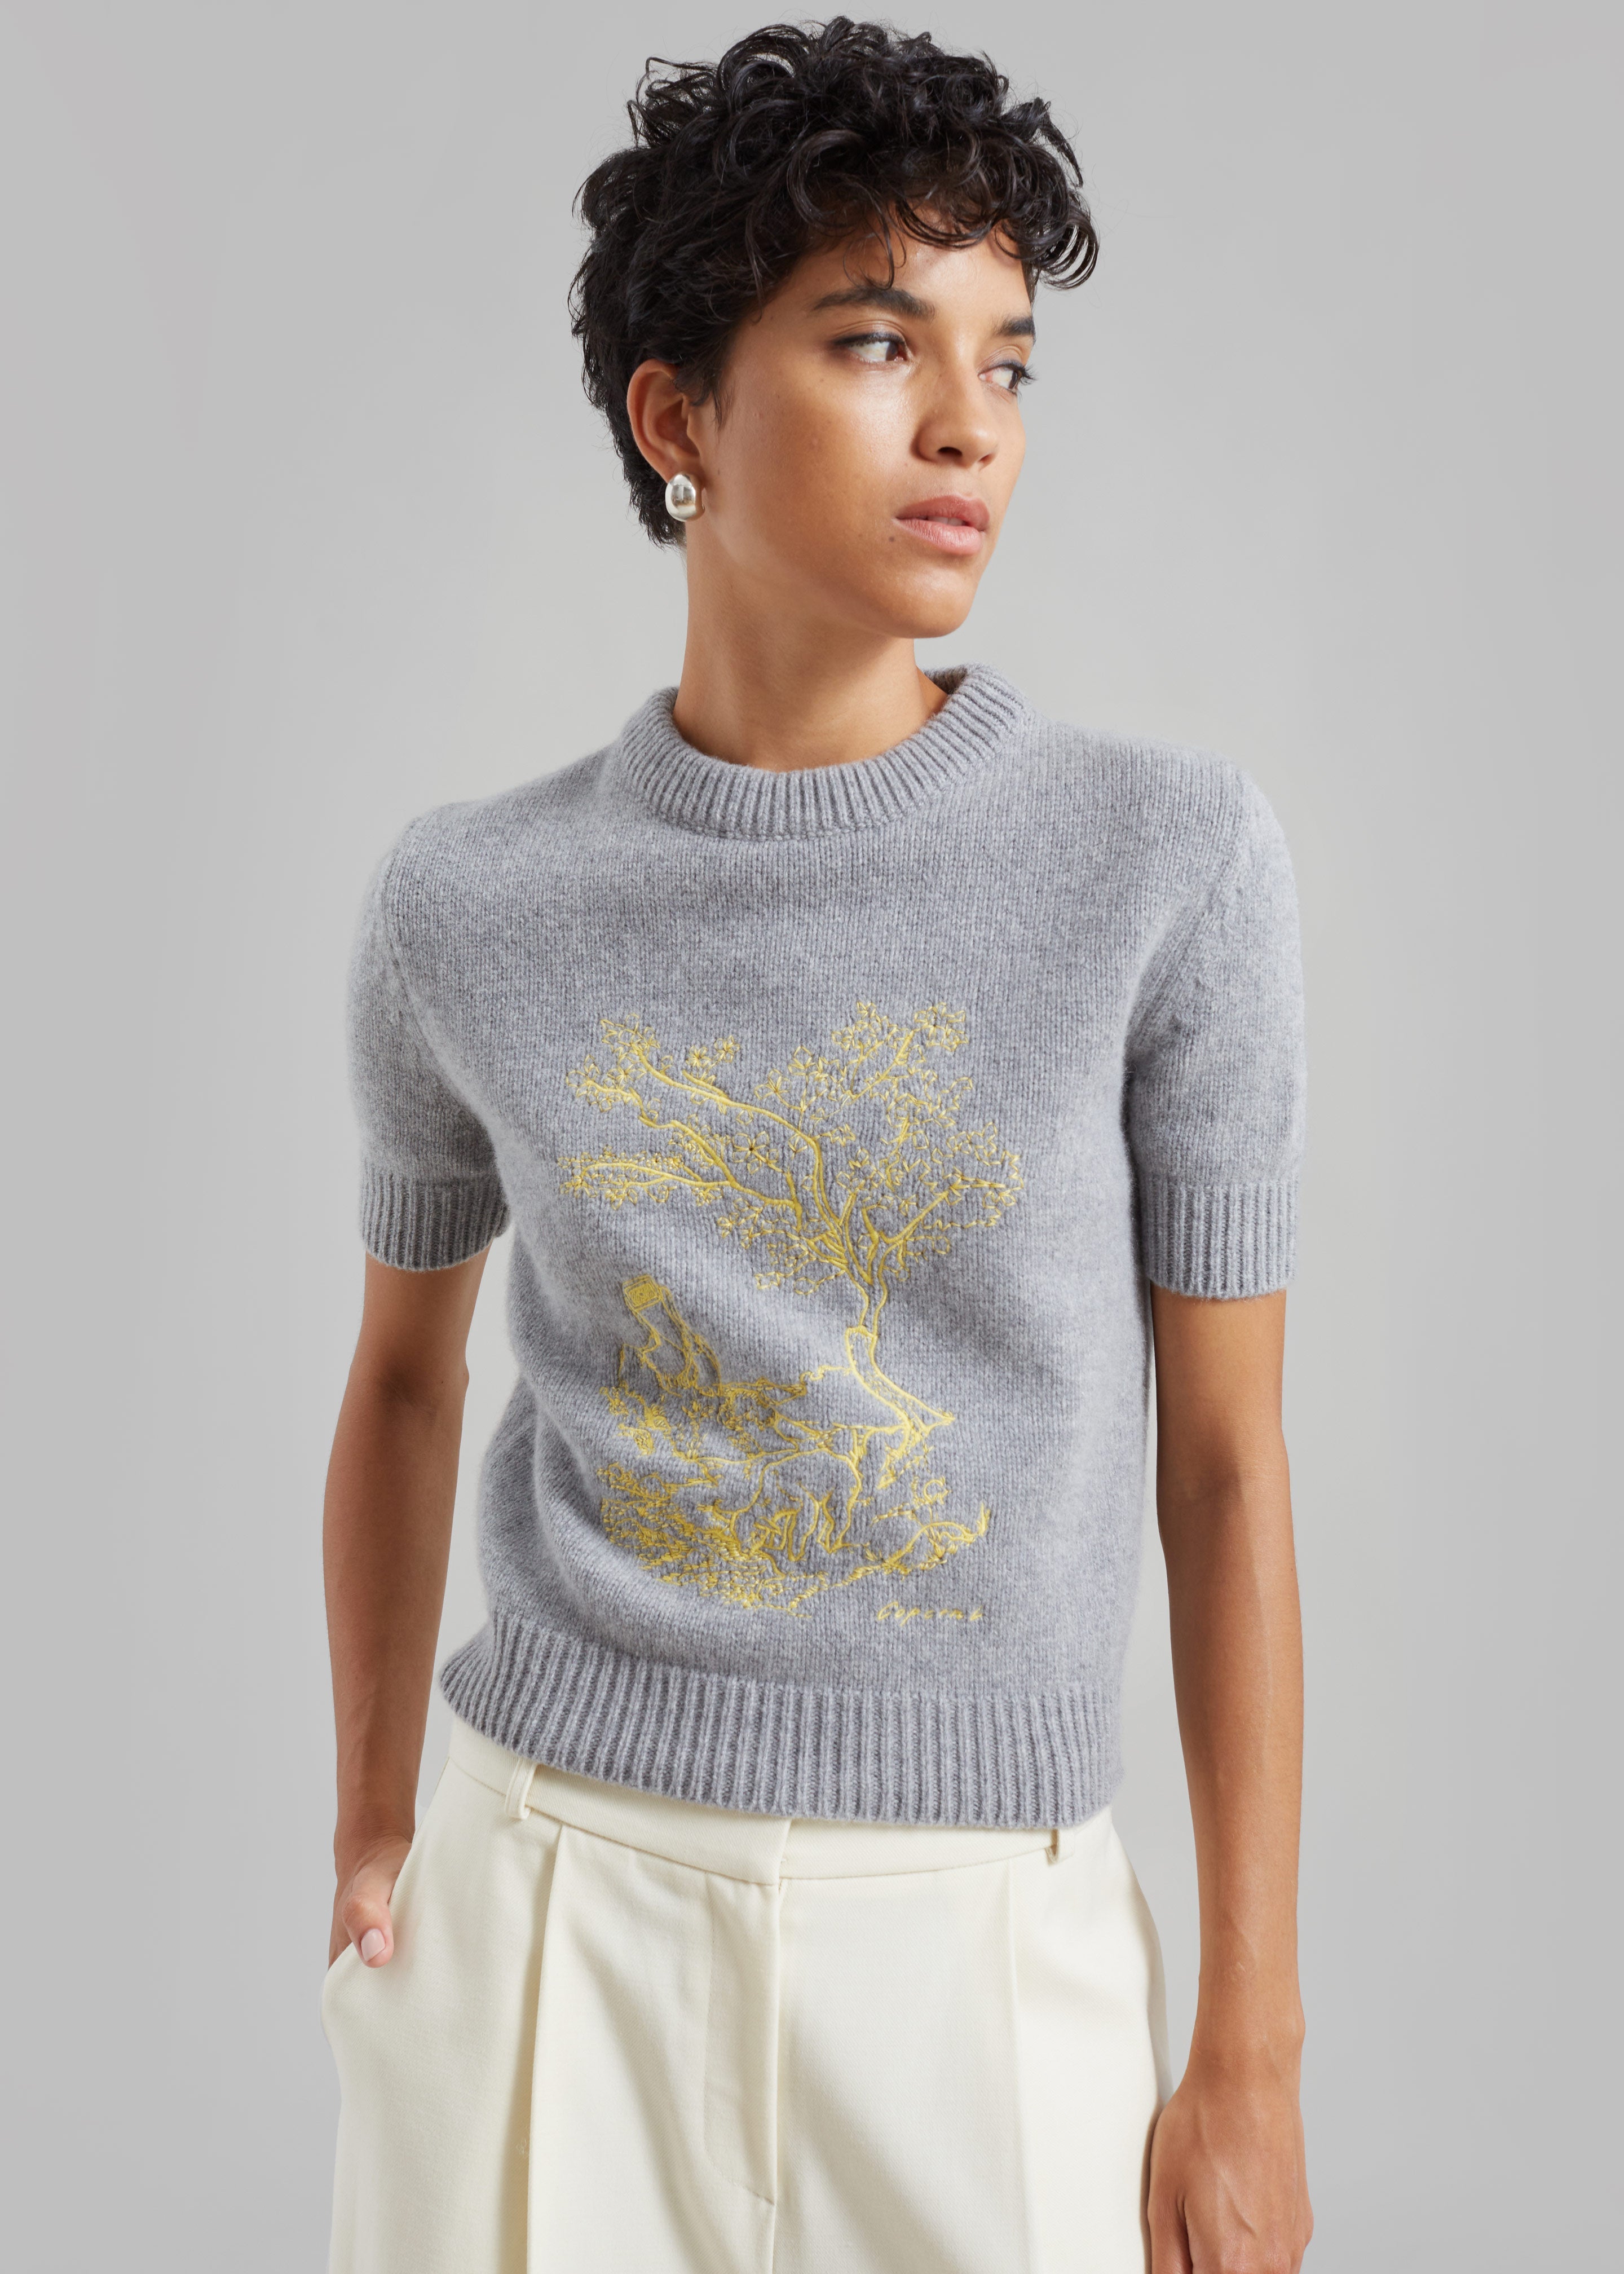 Coperni Cashmere Embroidered Cropped Sweater - Grey - 4